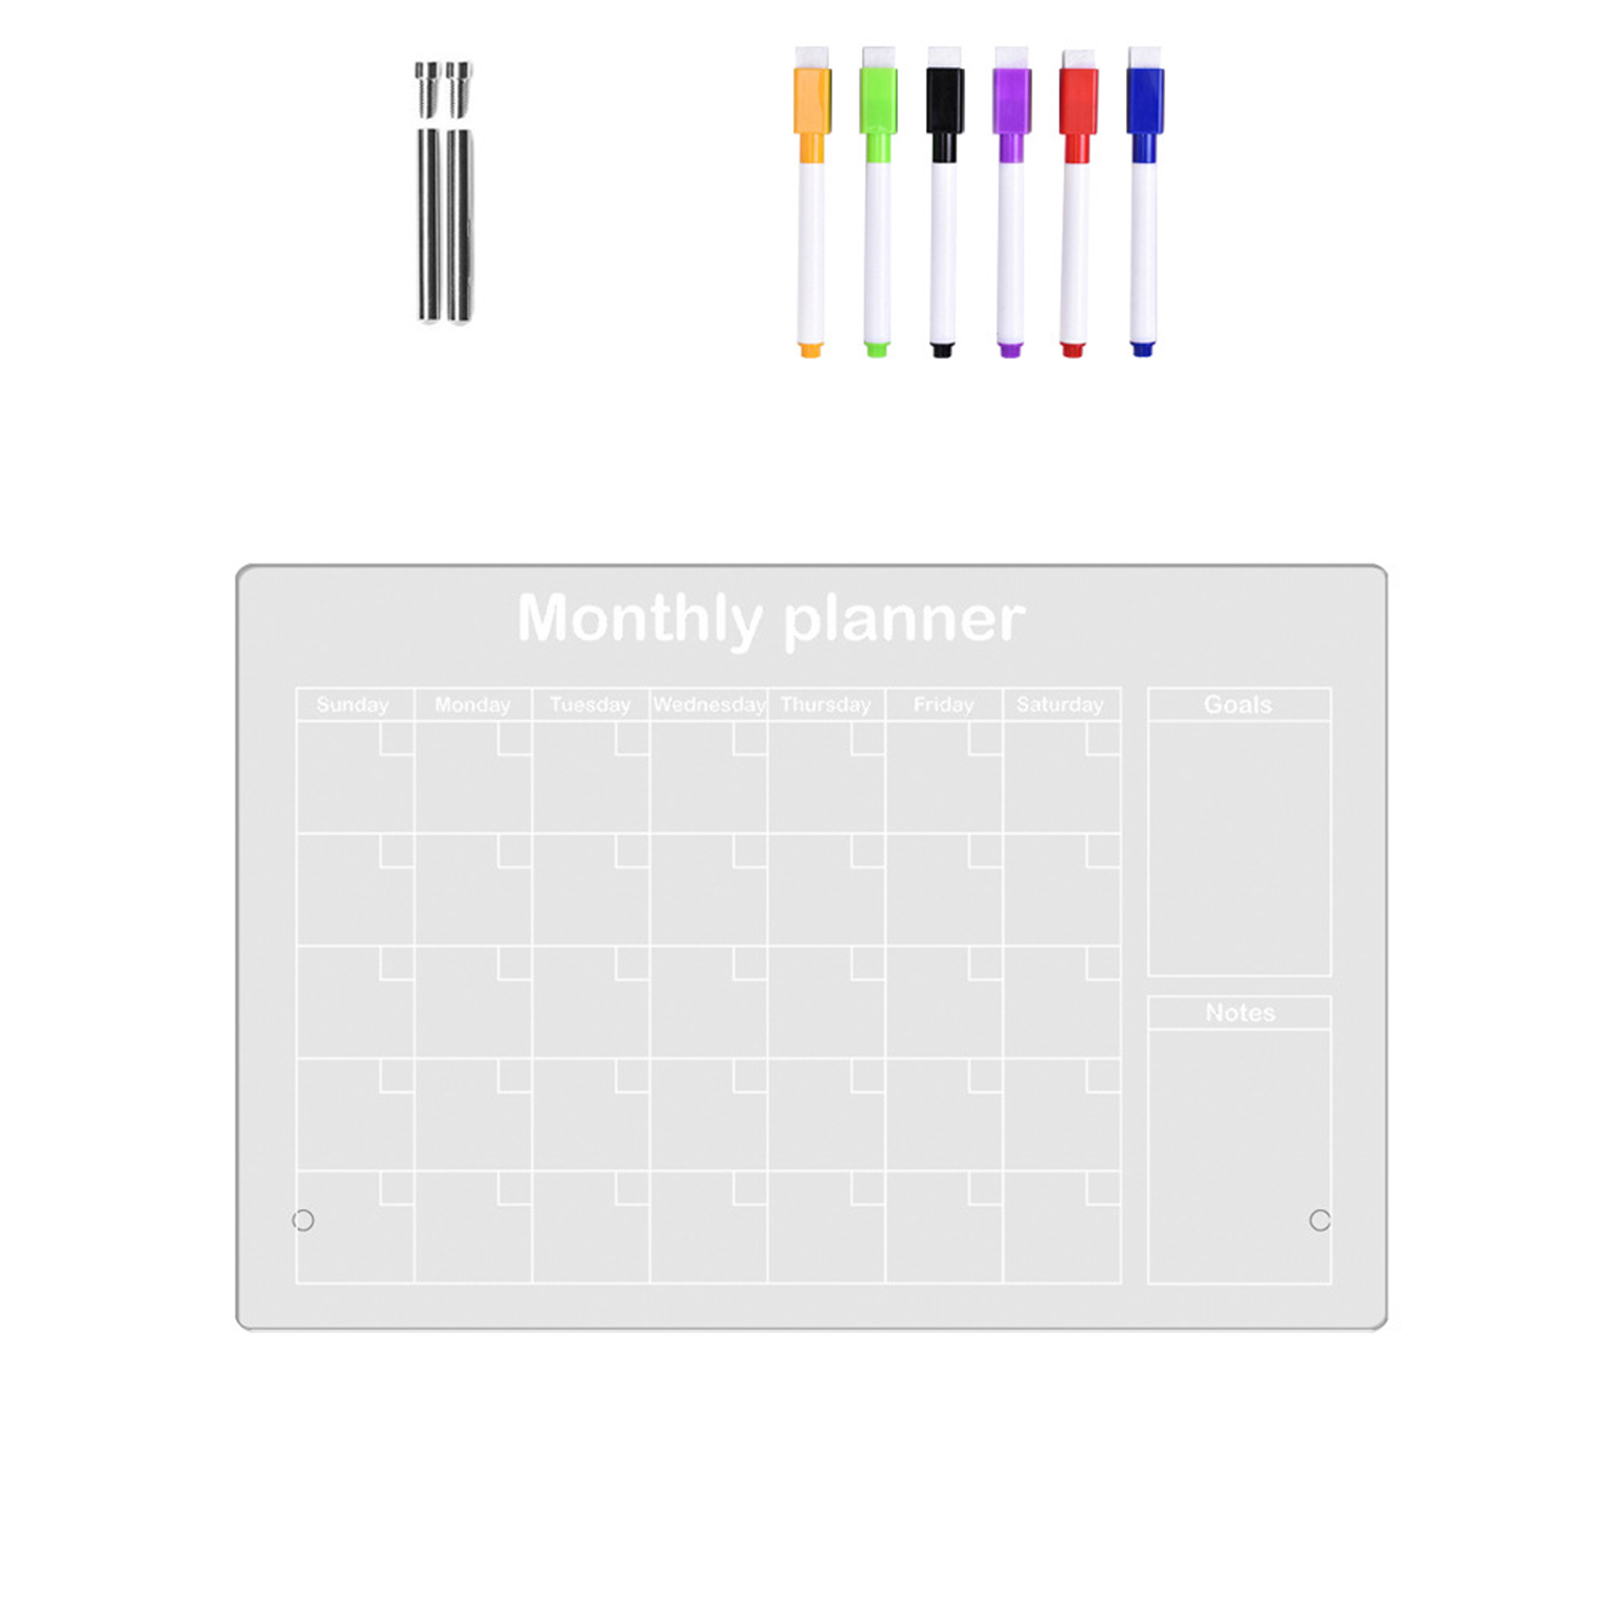 Acrylic Calendar Board Desktop Clear Memo Note Board Monthly Planning Whiteboard With Stand 6 Markers Pen For Office Home School